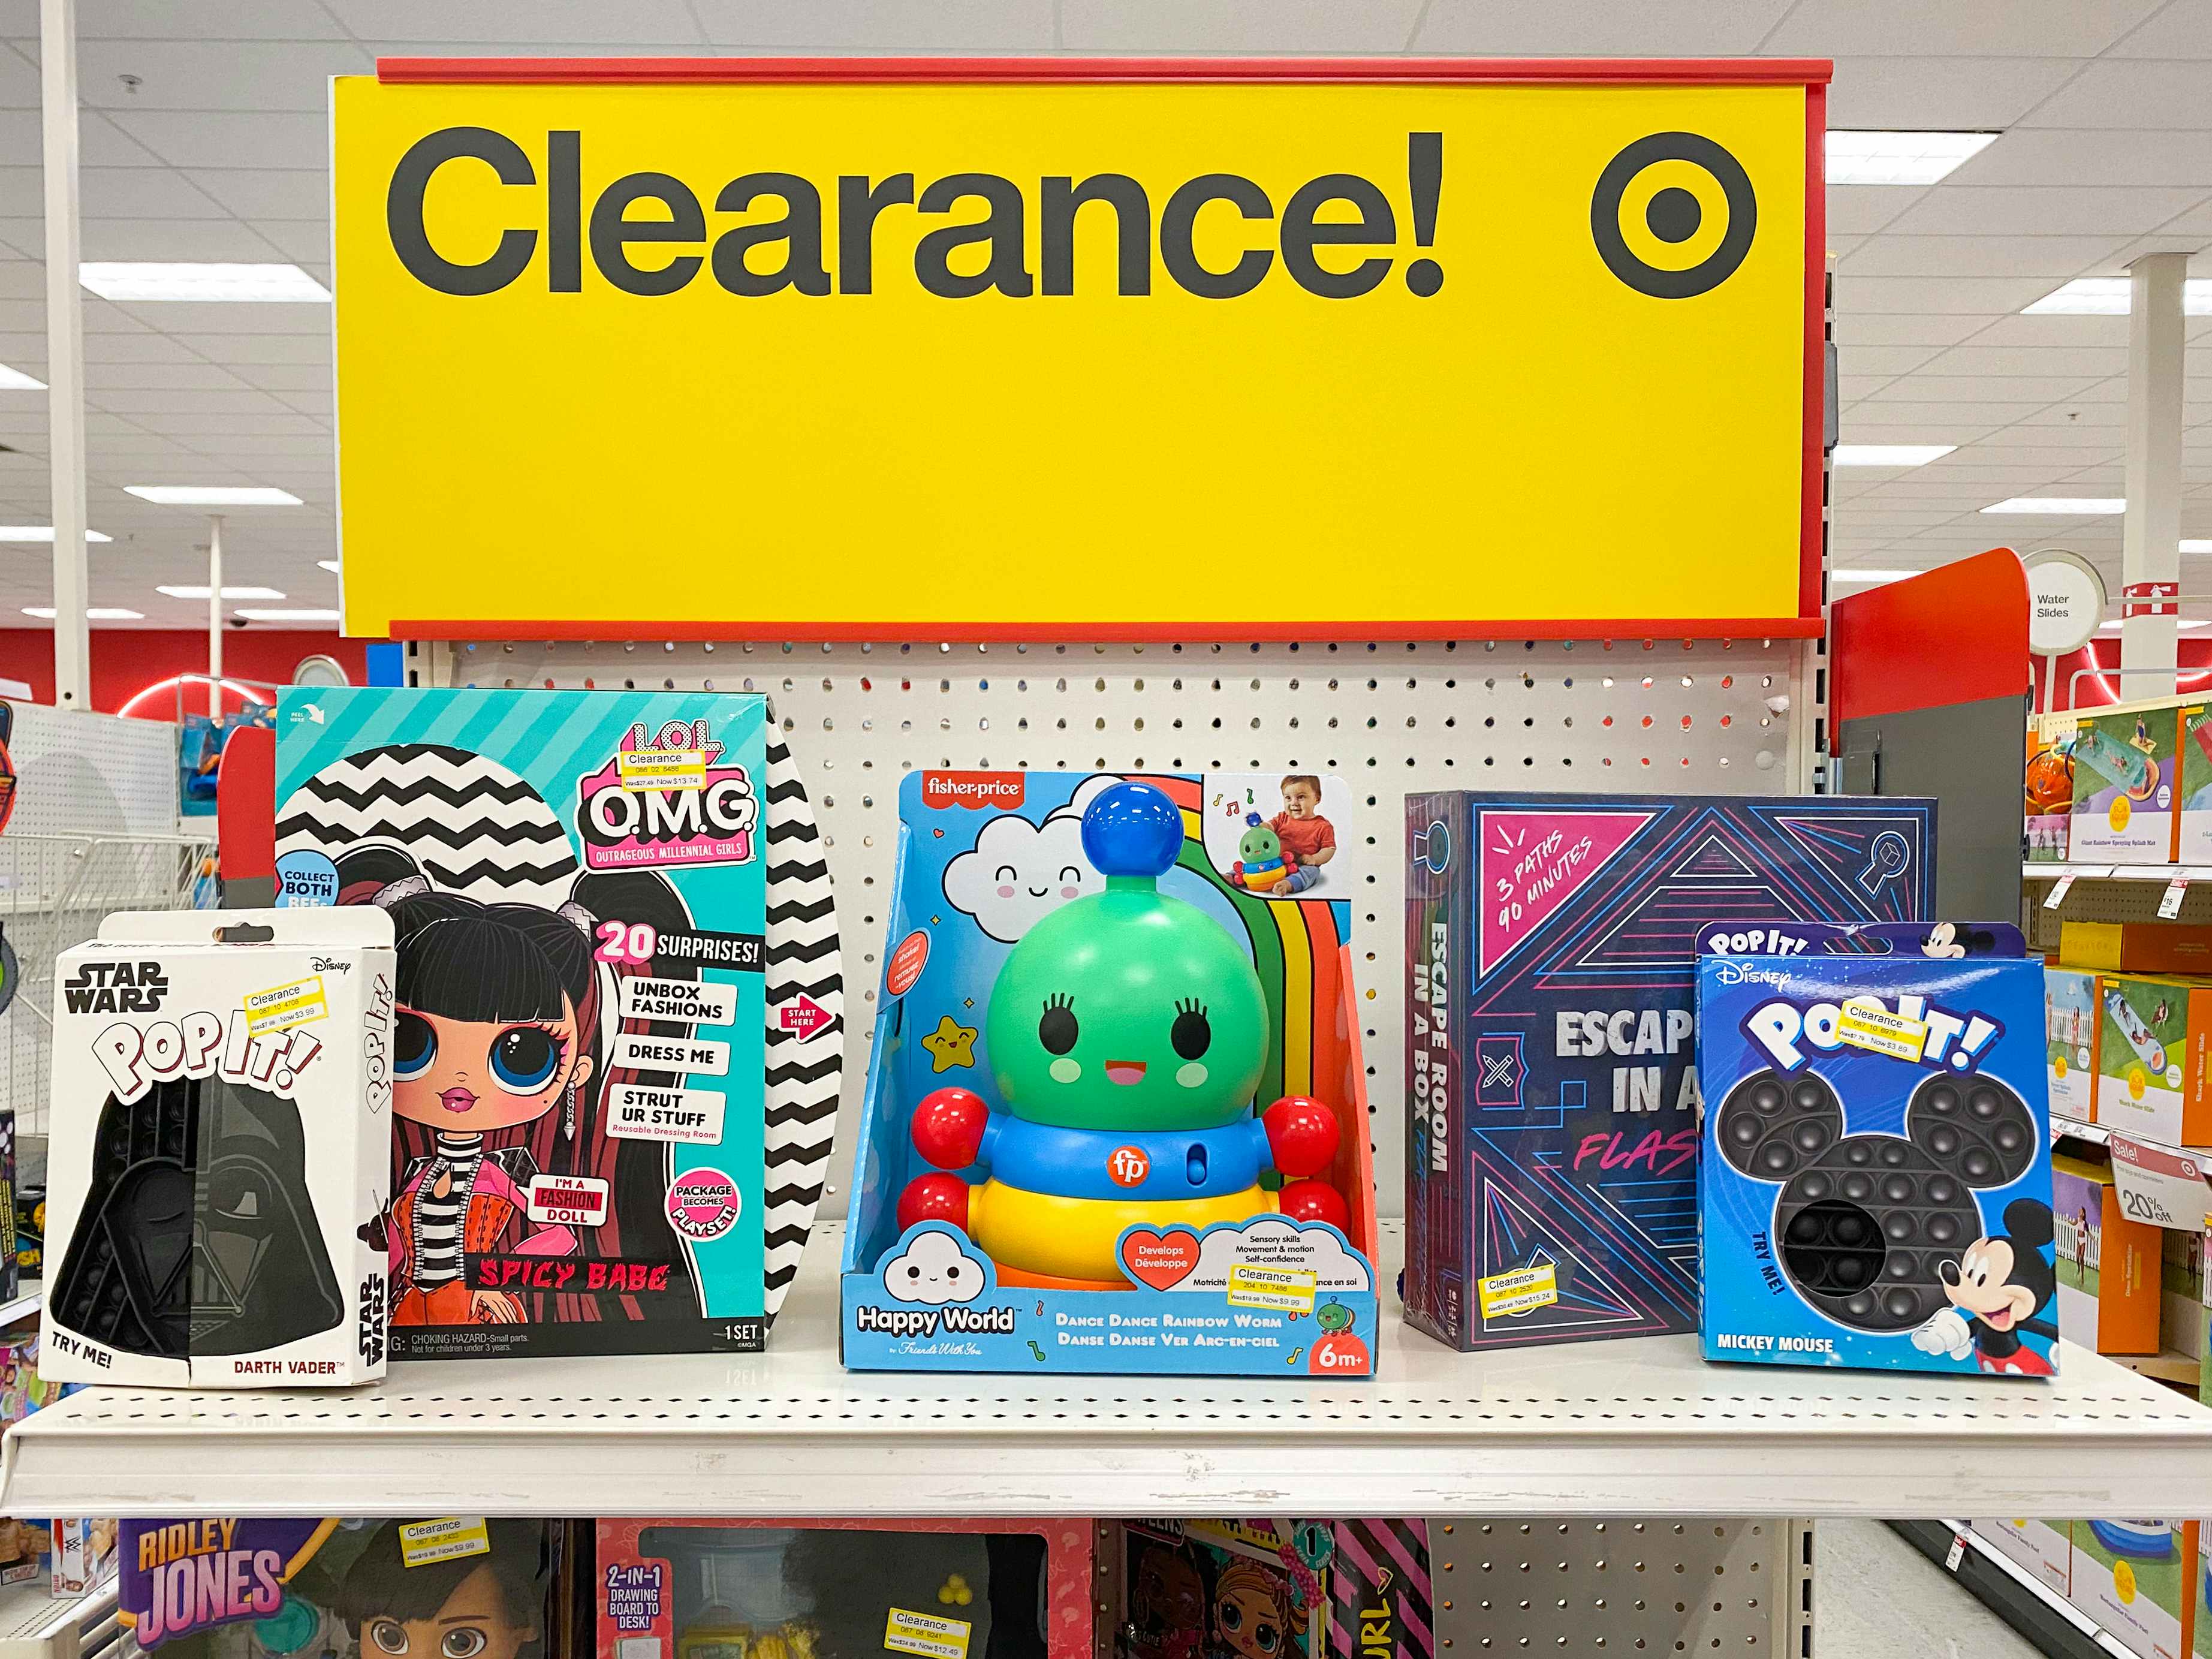 A display of clearance toys at Target with a large yellow Clearance sign.